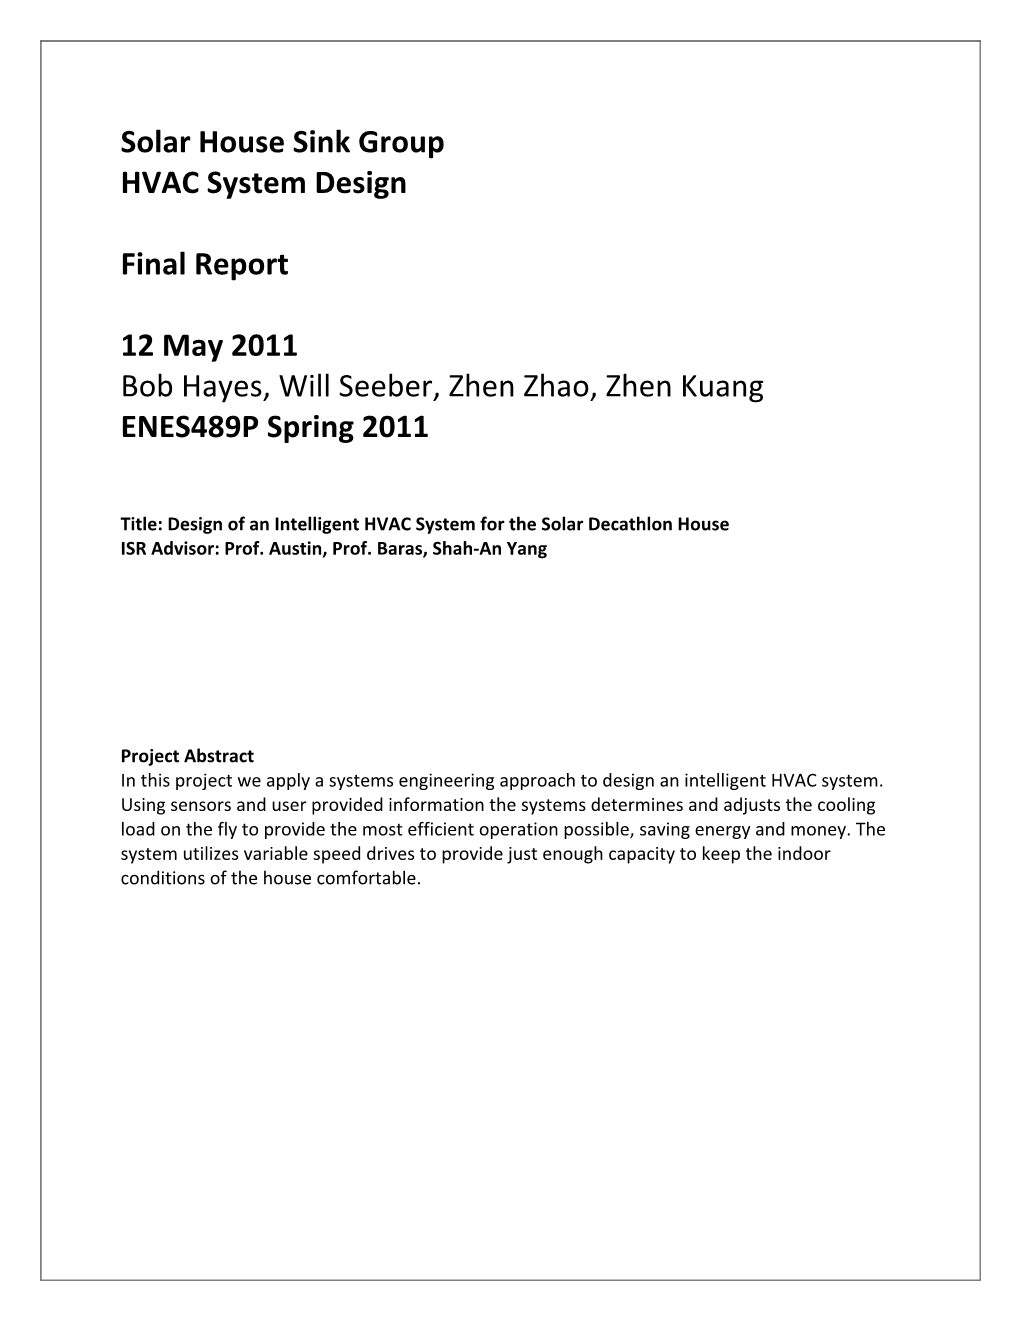 Solar House Sink Group HVAC System Design Final Report 12 May